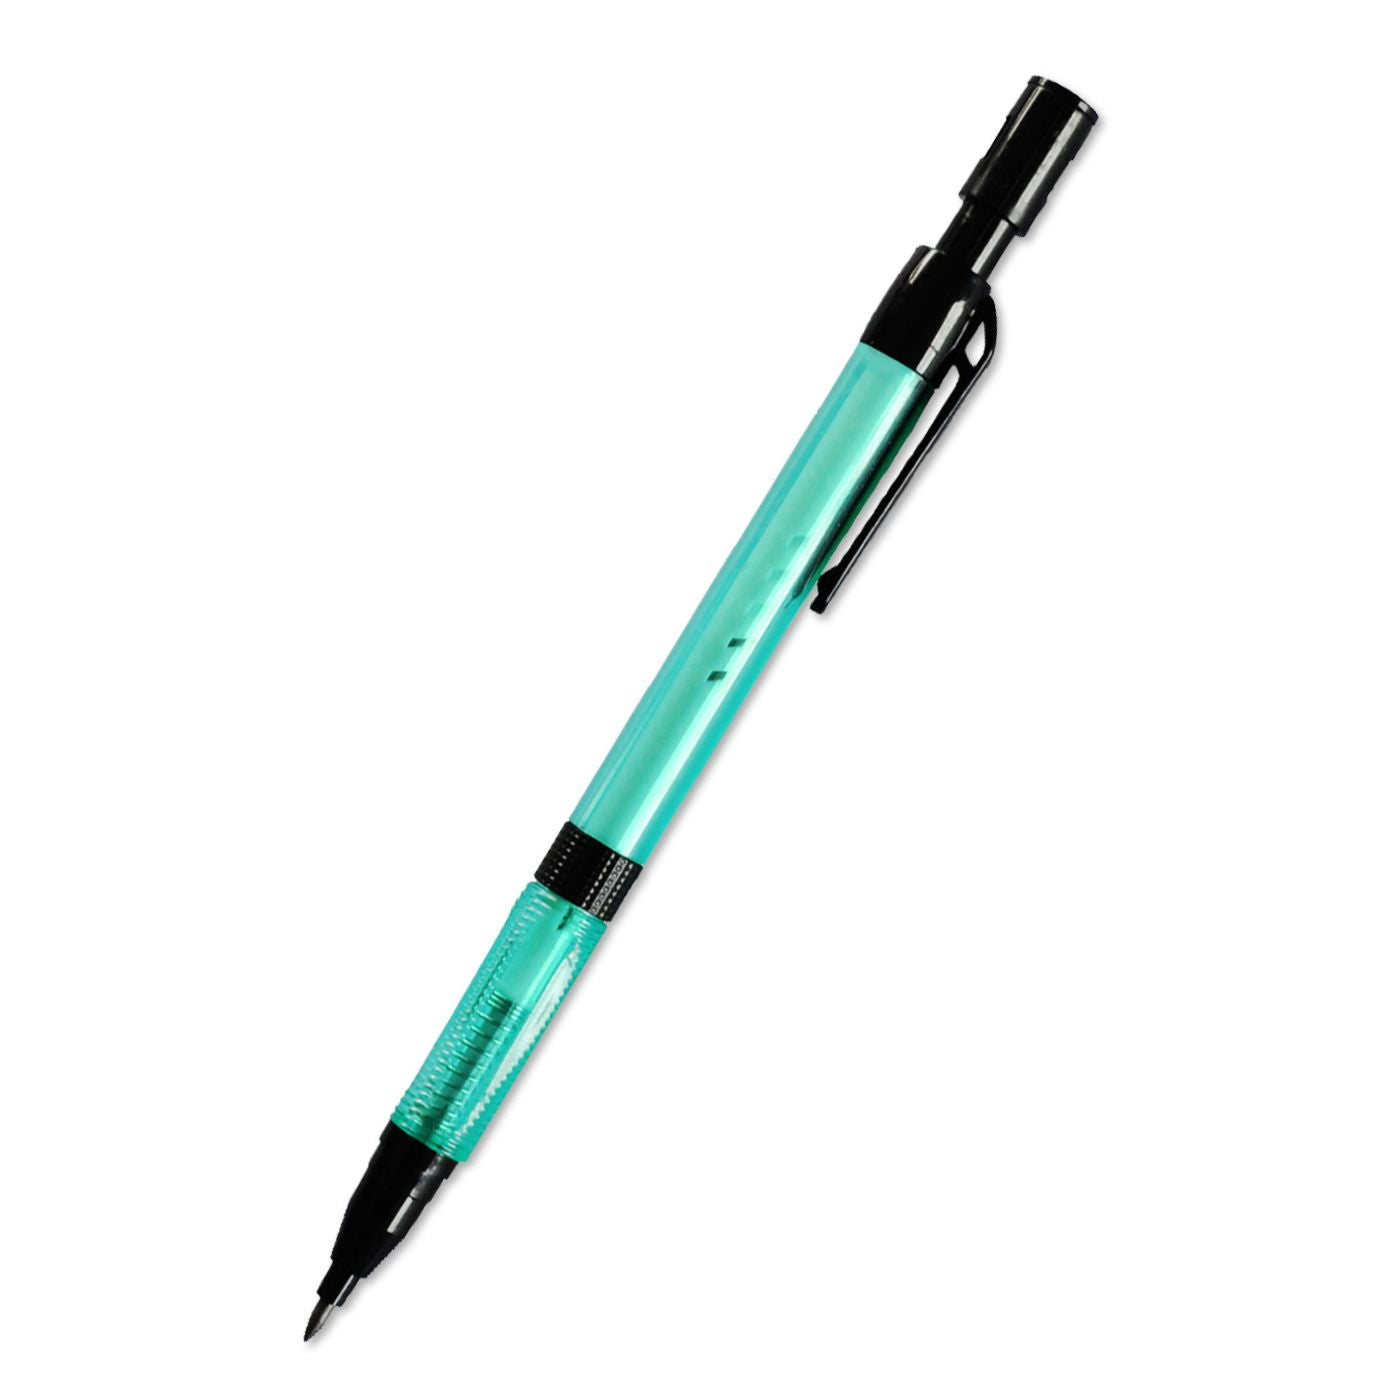 Tyco Triangular HB Mechanical Pencil TY-520 With Lead Sharpener 2.00mm Green